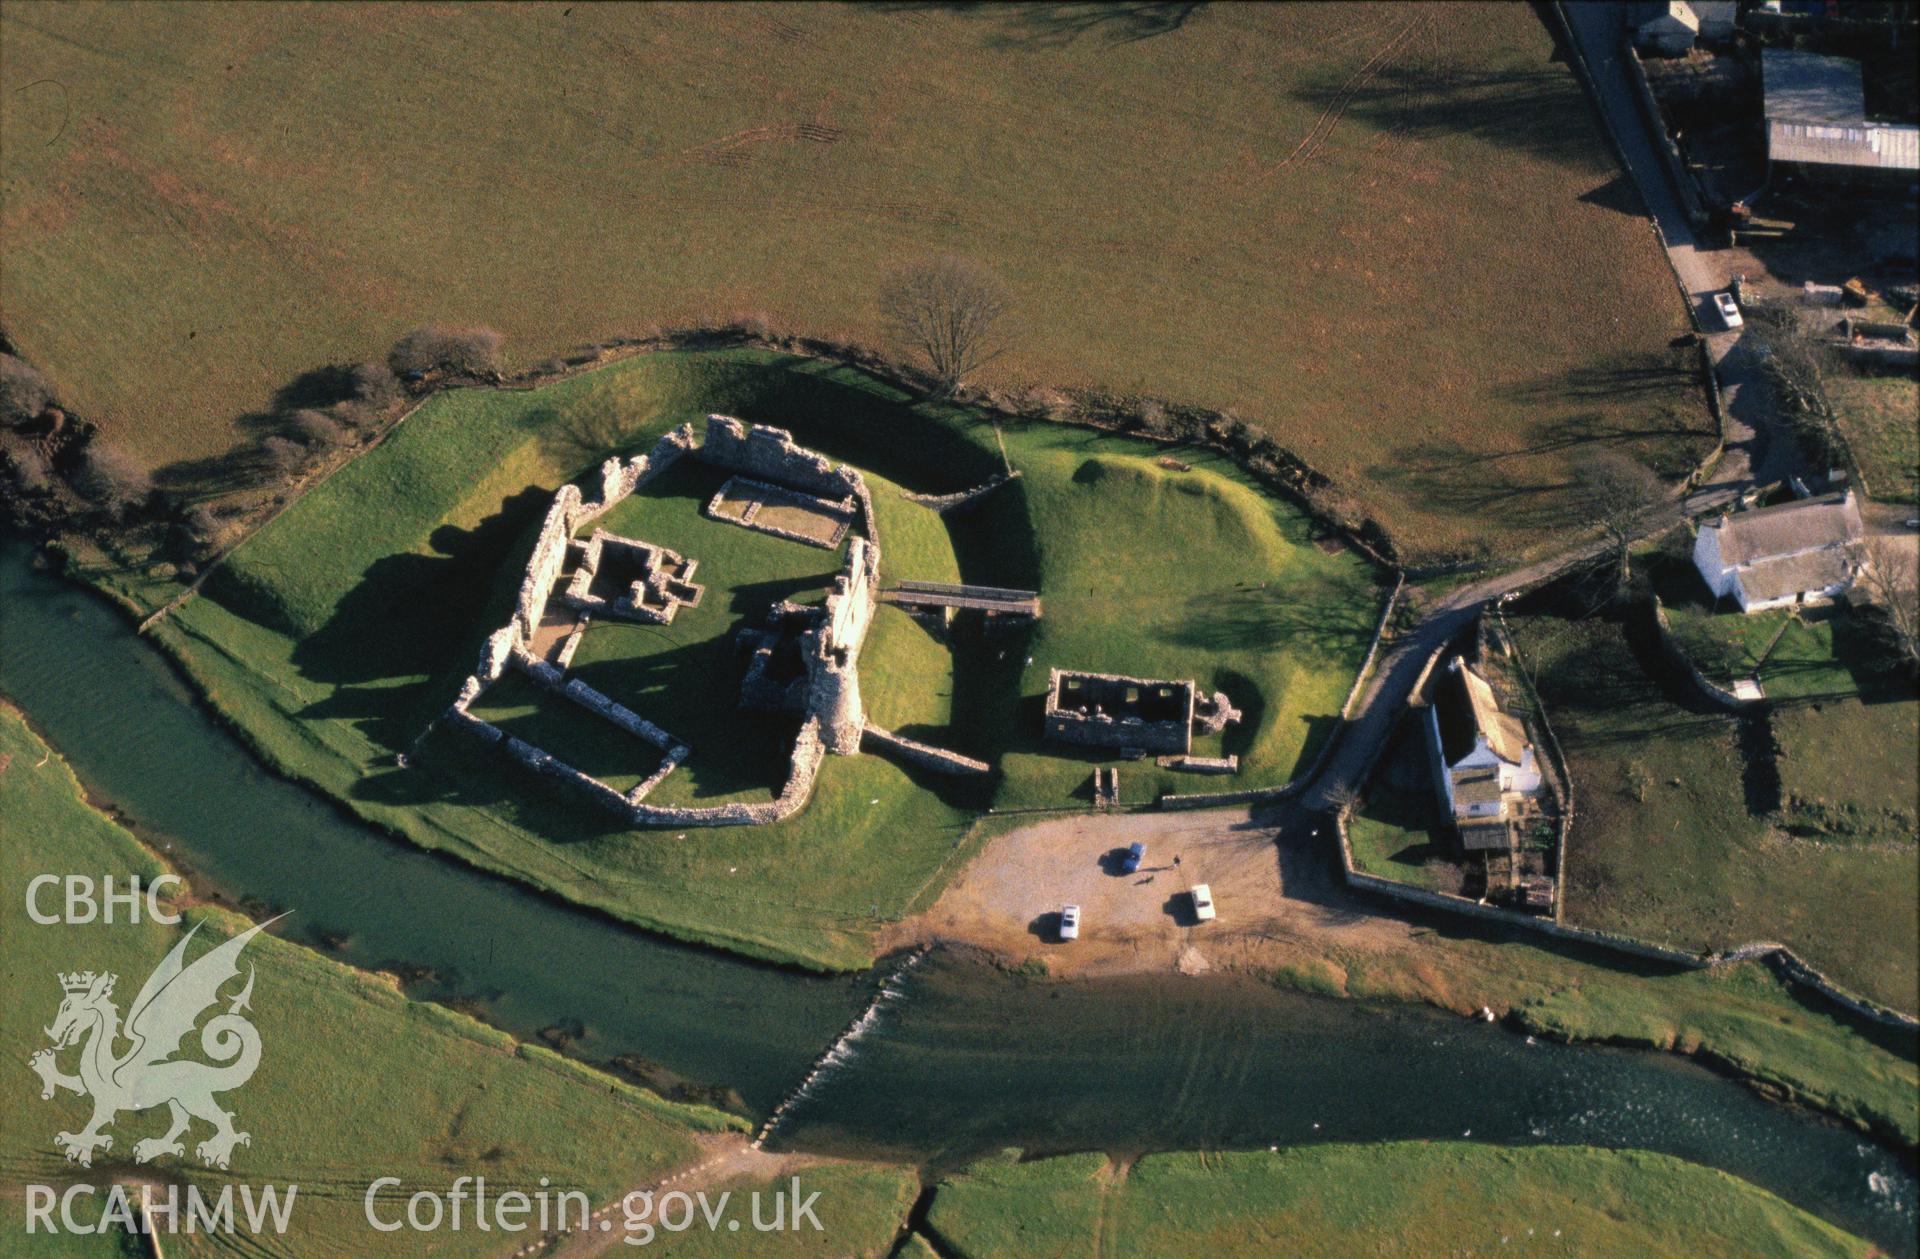 Slide of RCAHMW colour oblique aerial photograph of Ogmore Castle, taken by C.R. Musson, 12/2/1988.